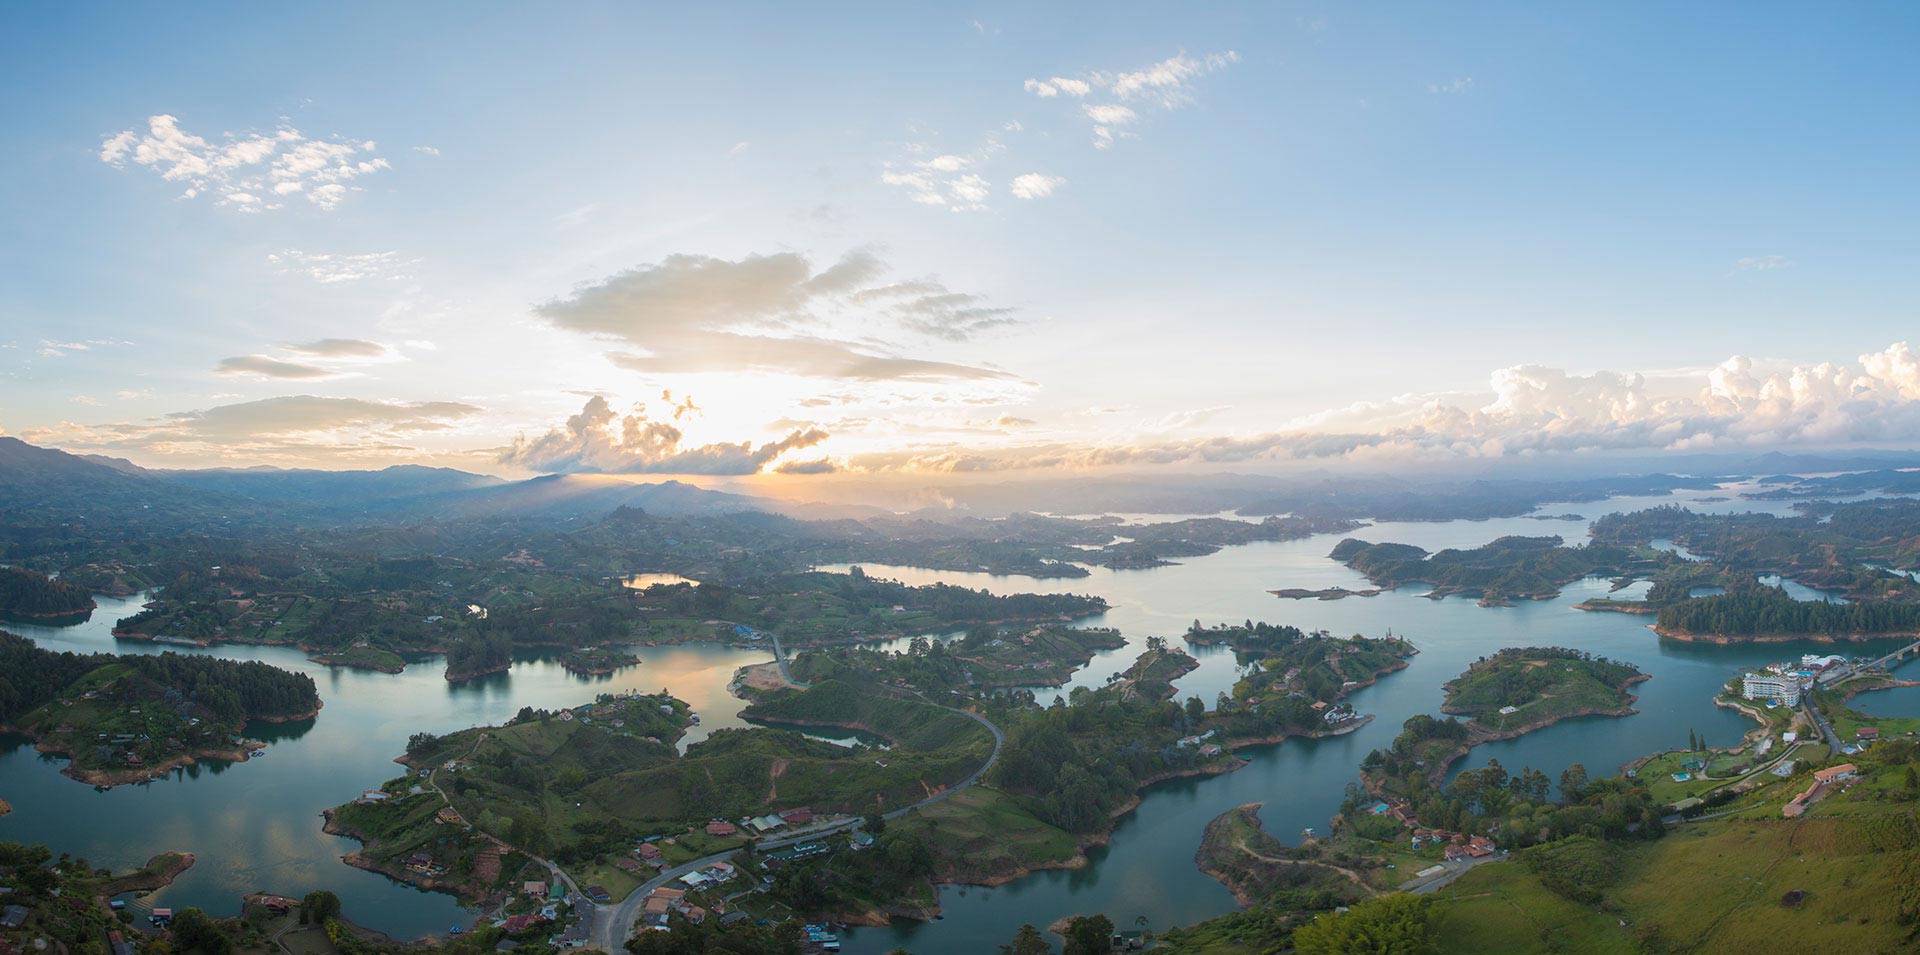 Lakes and Islands in Guatape, Colombia